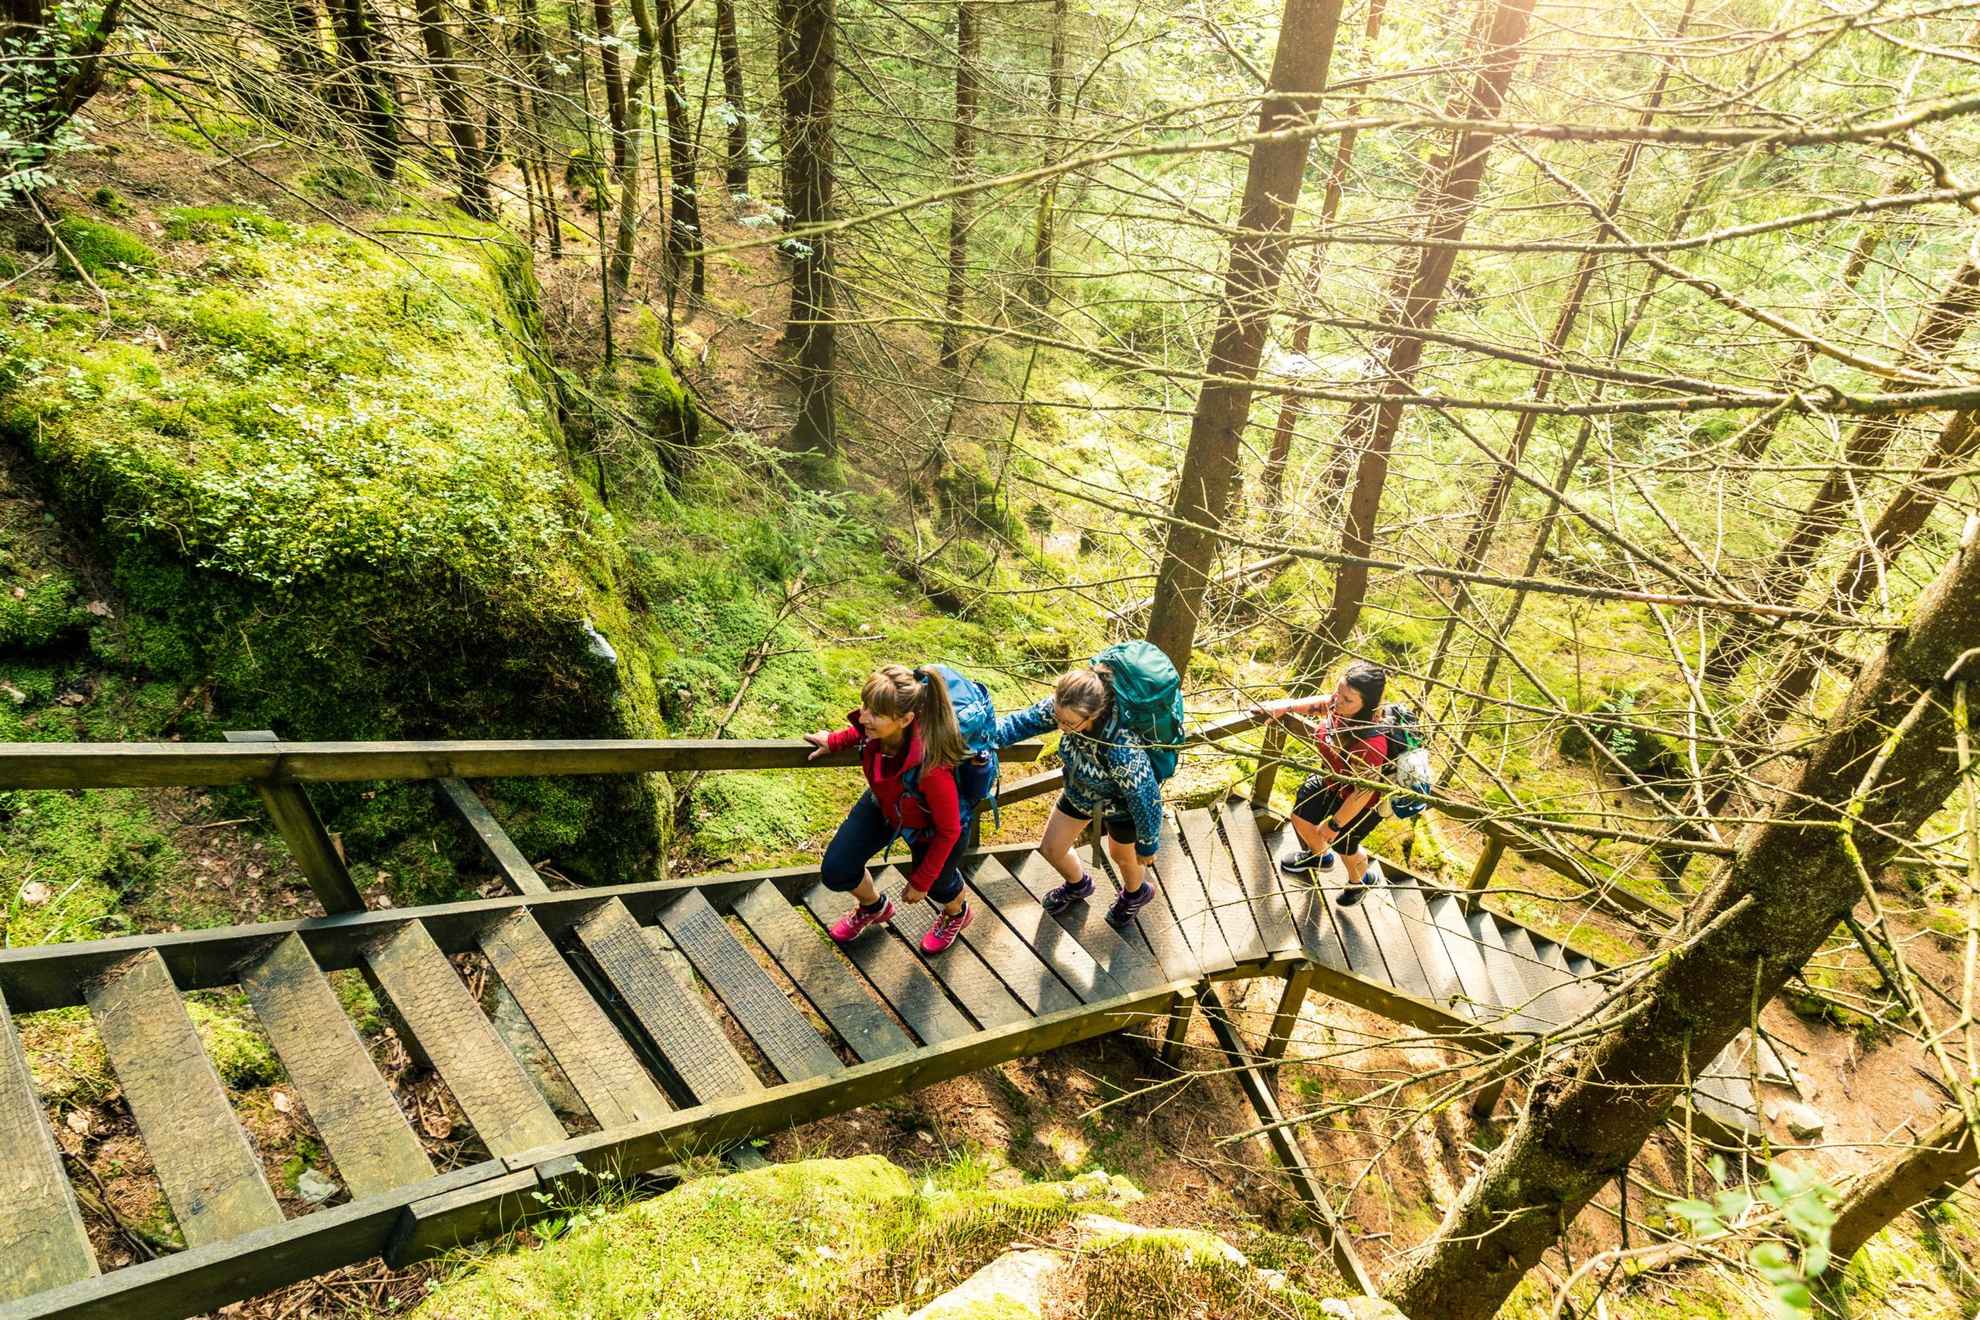 Three people with backpacks are walking up a wooden staircase in a forest.